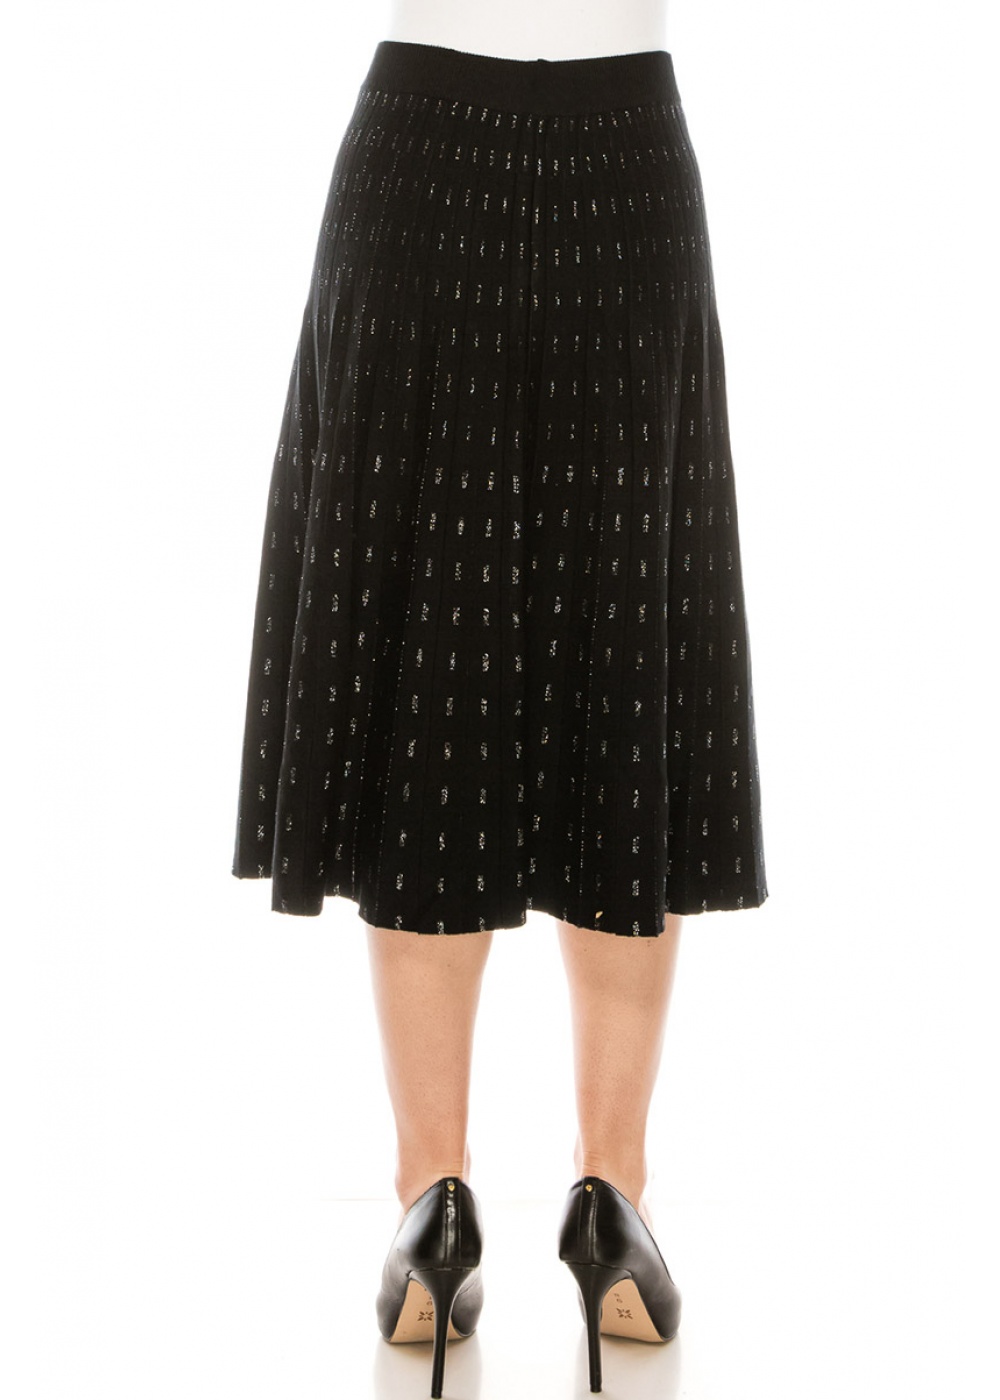 A-line skirt with a shiny pattern